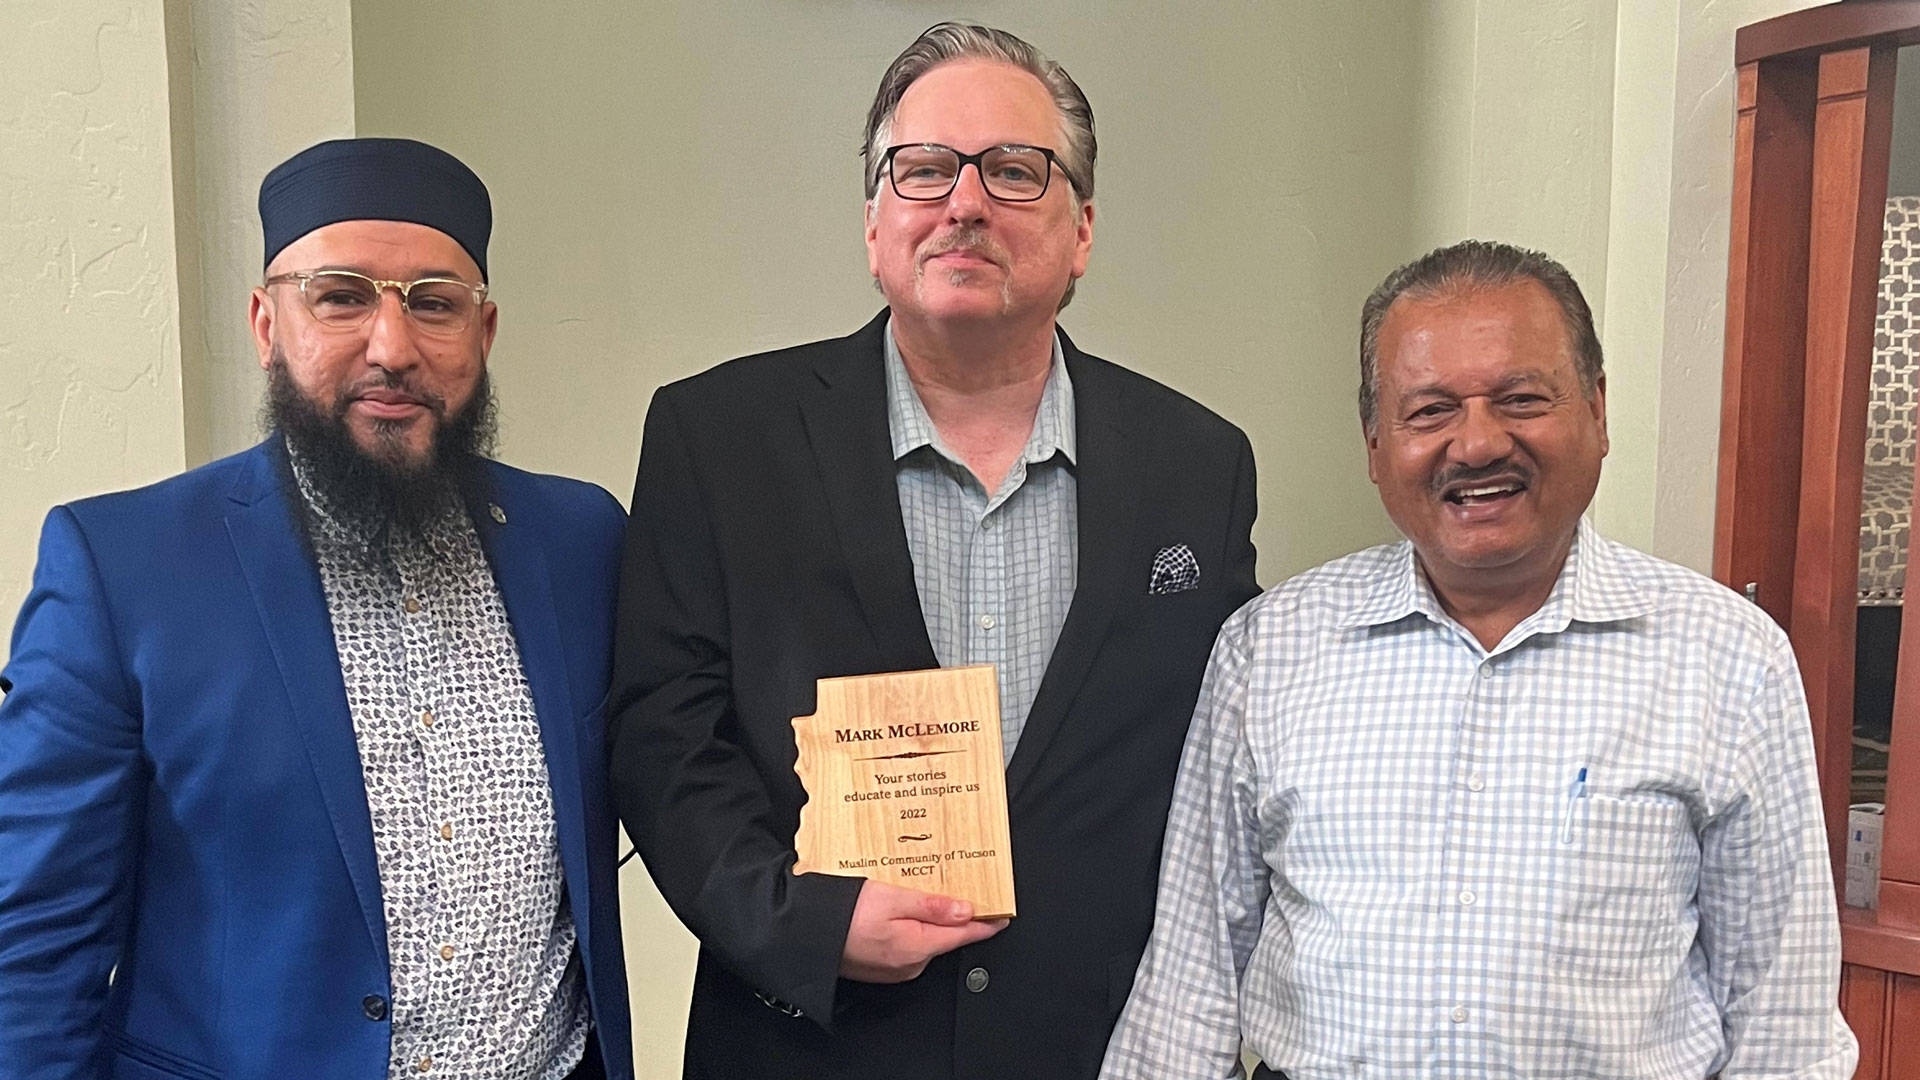 Left to Right: Imam Hassan Syed Ali, Mark McLemore, and Maqsood Ahmad at the Muslim Community Center of Tucson on July 1, 2022.